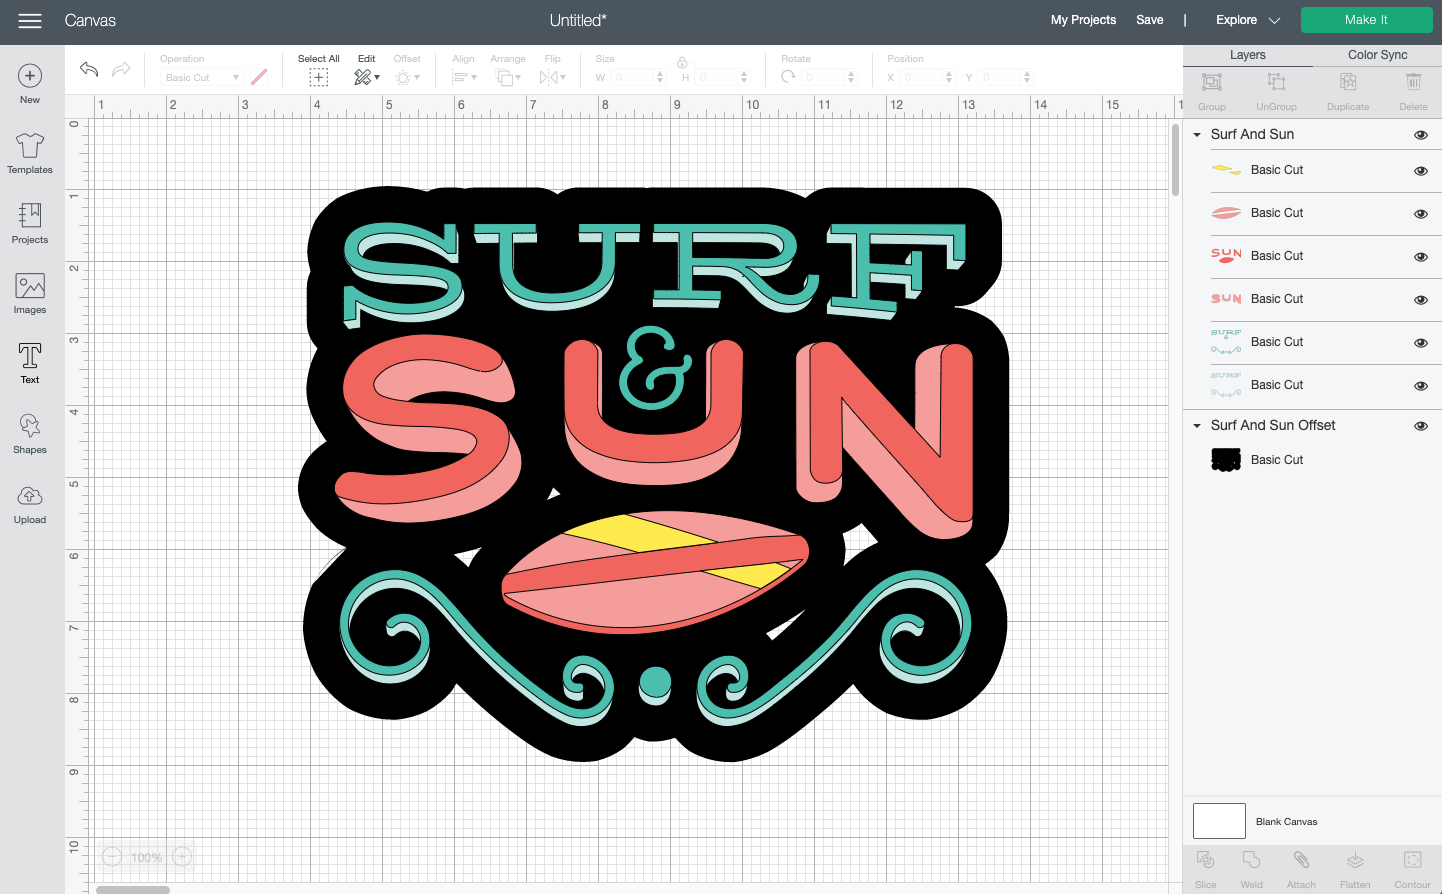 Cricut Design Space: Surf and Sun image with offset (which has "holes")